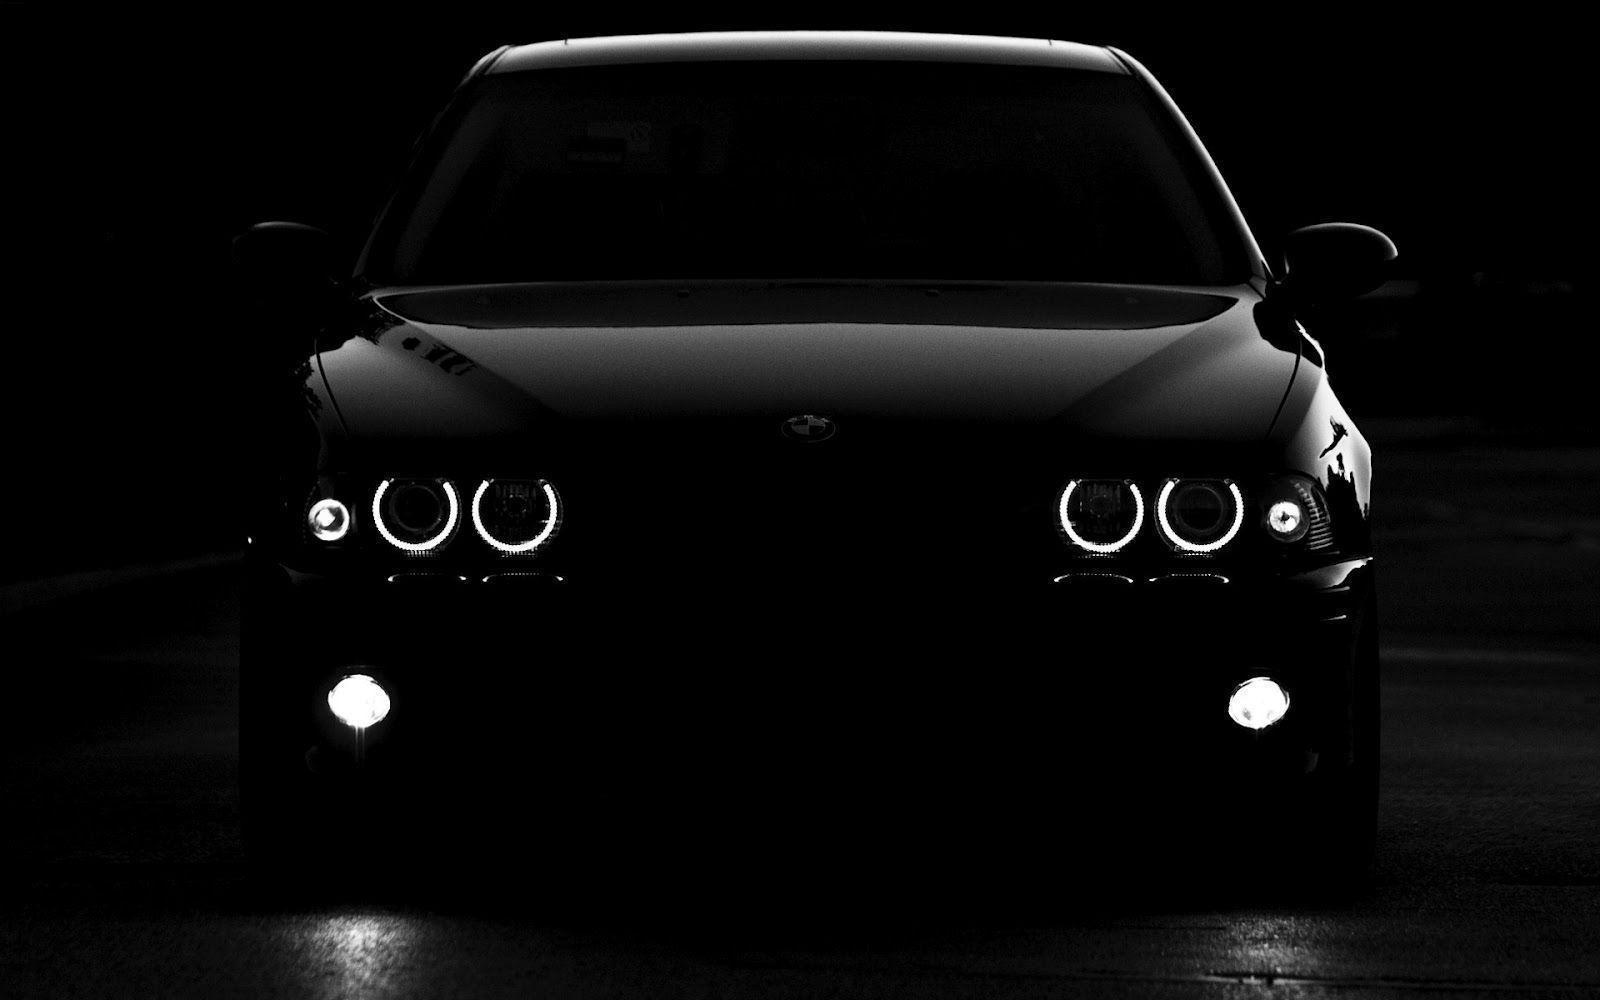 car wallpaper black background Search Engine